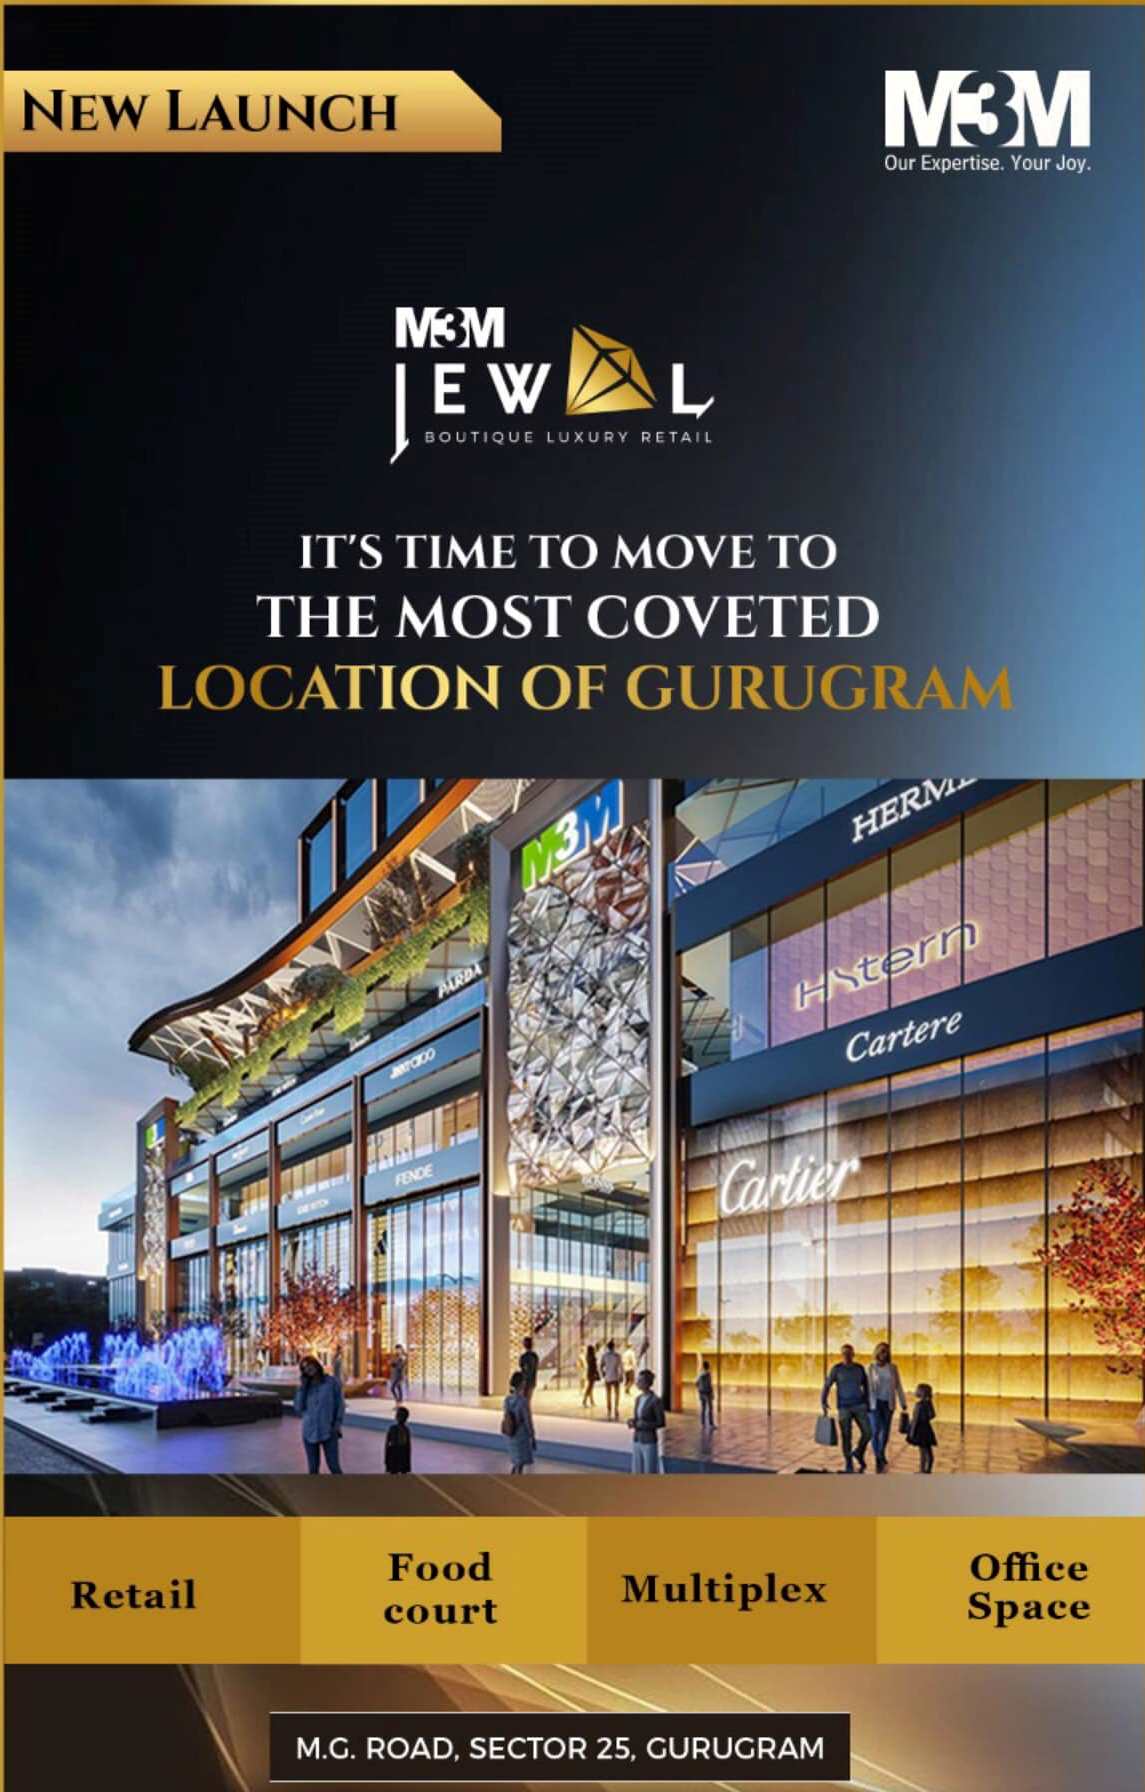 It’s a boutique luxury retail at M3M Jewel in Sector 25, Gurgaon Update